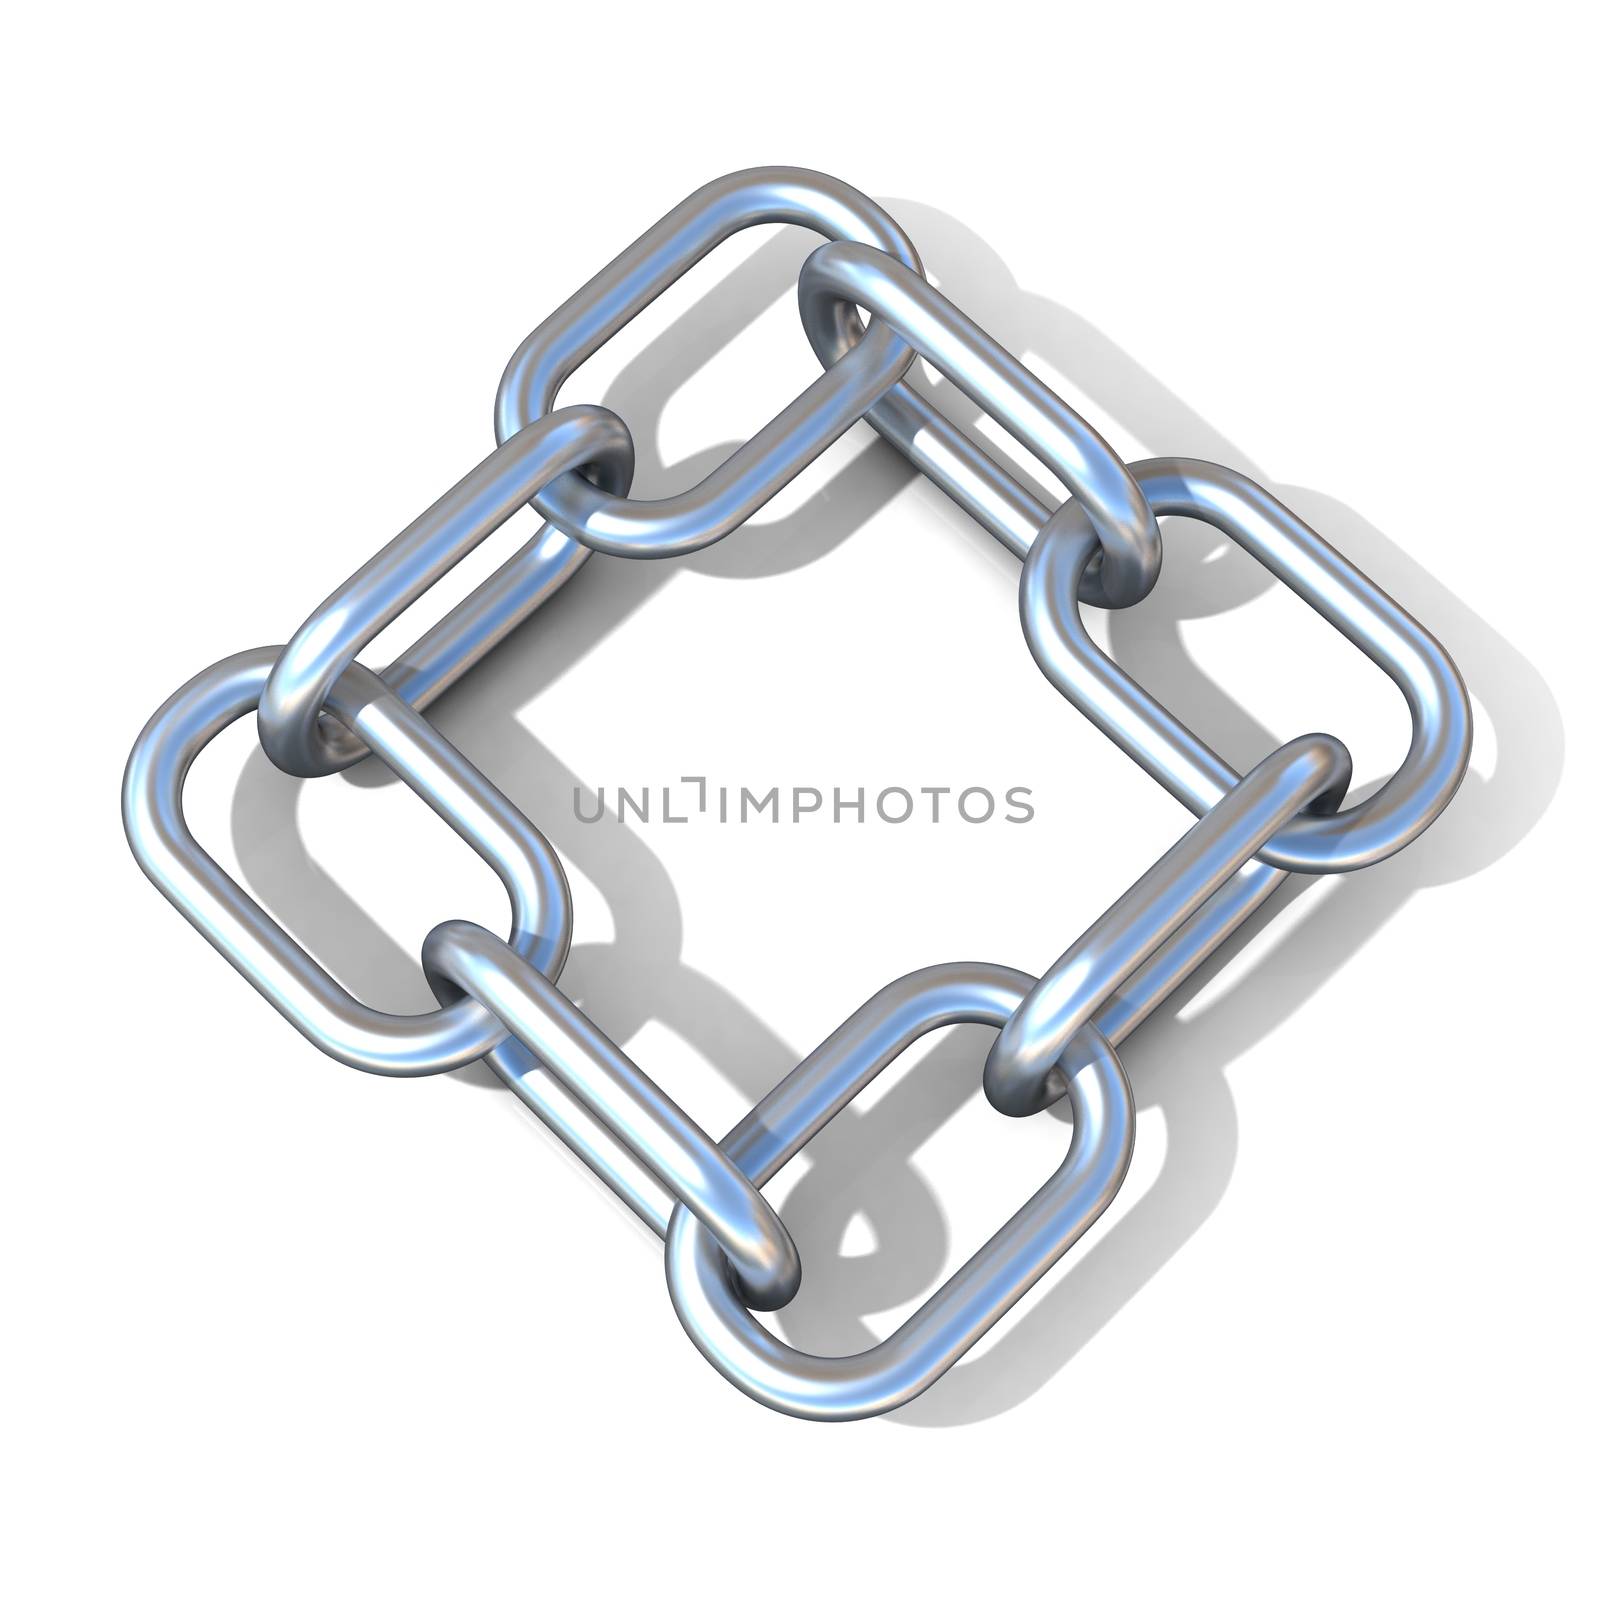 Abstract 3D illustration of a steel chain link isolated on white background. Top view